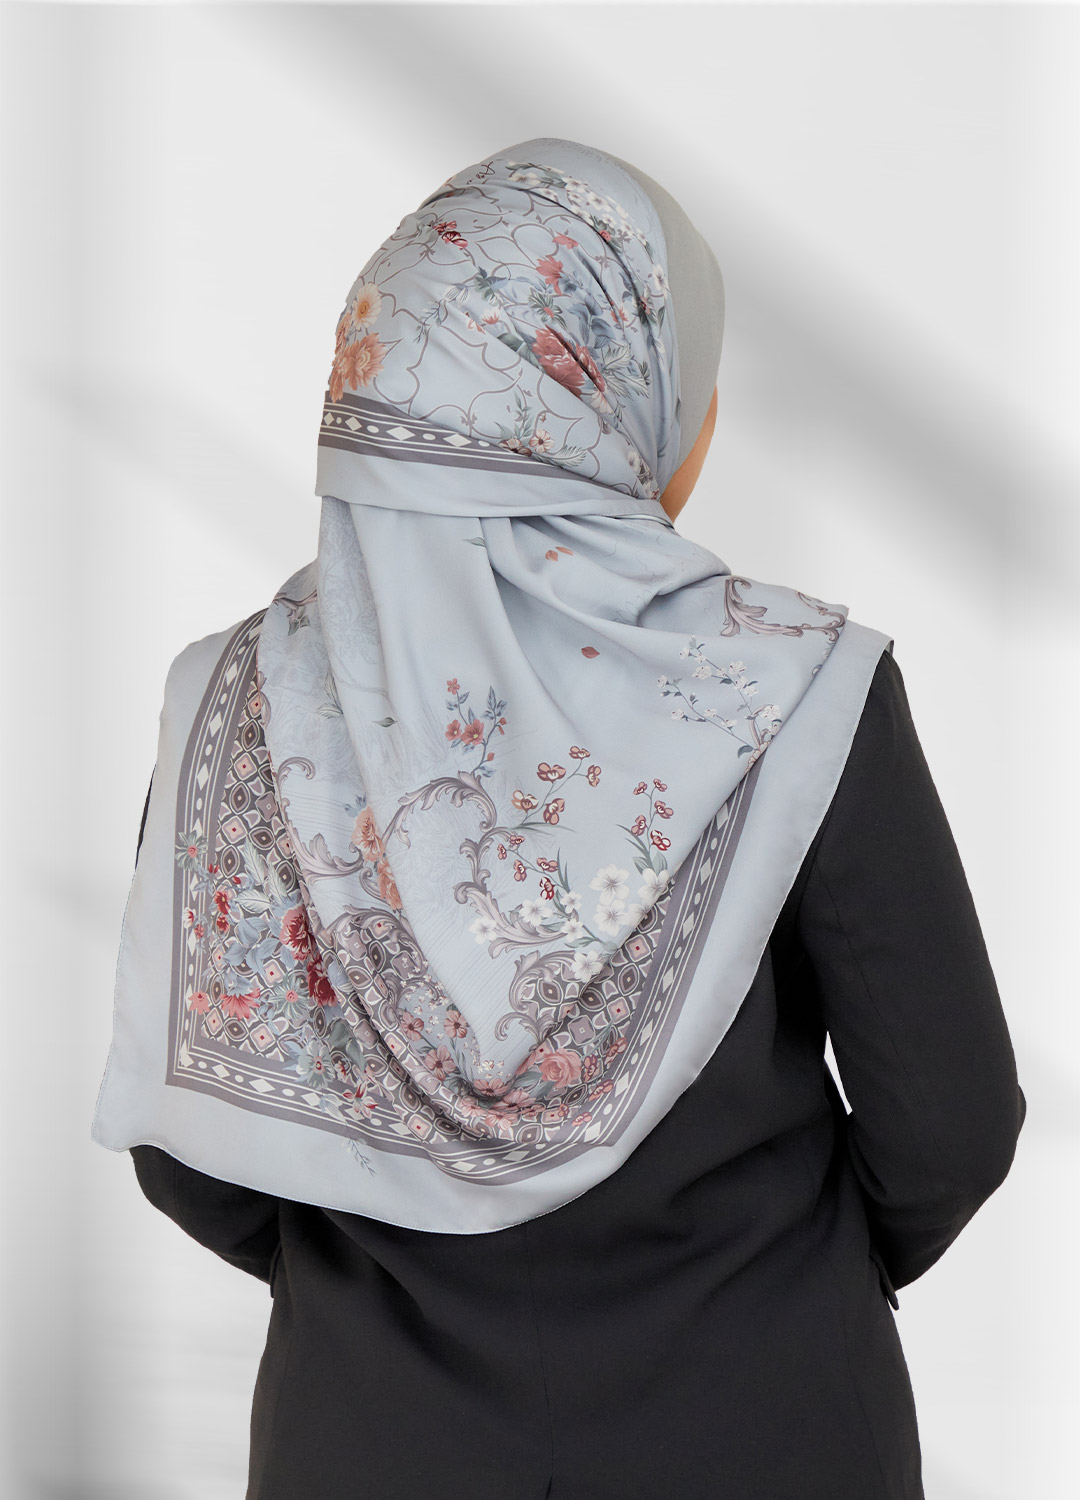 BAWAL SATIN AIRA LUXE 03 PROFESSIONAL